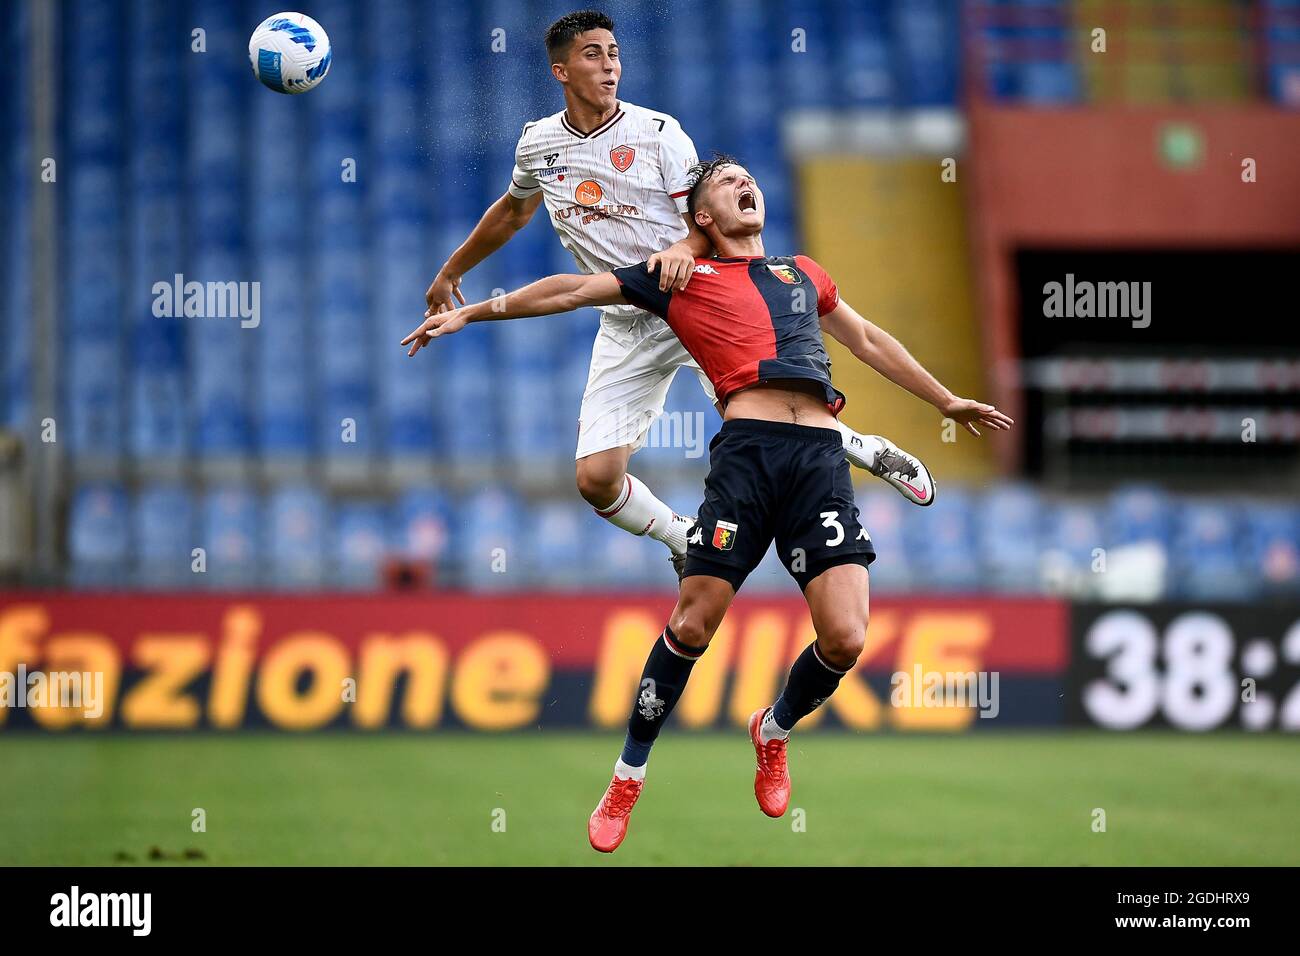 Genoa, Italy. 13 August 2021. Samuele Righetti (L) of AC Perugia competes for a header with Zinho Vanheusden of Genoa CFC during the Coppa Italia football match between Genoa CFC and AC Perugia. Credit: Nicolò Campo/Alamy Live News Stock Photo